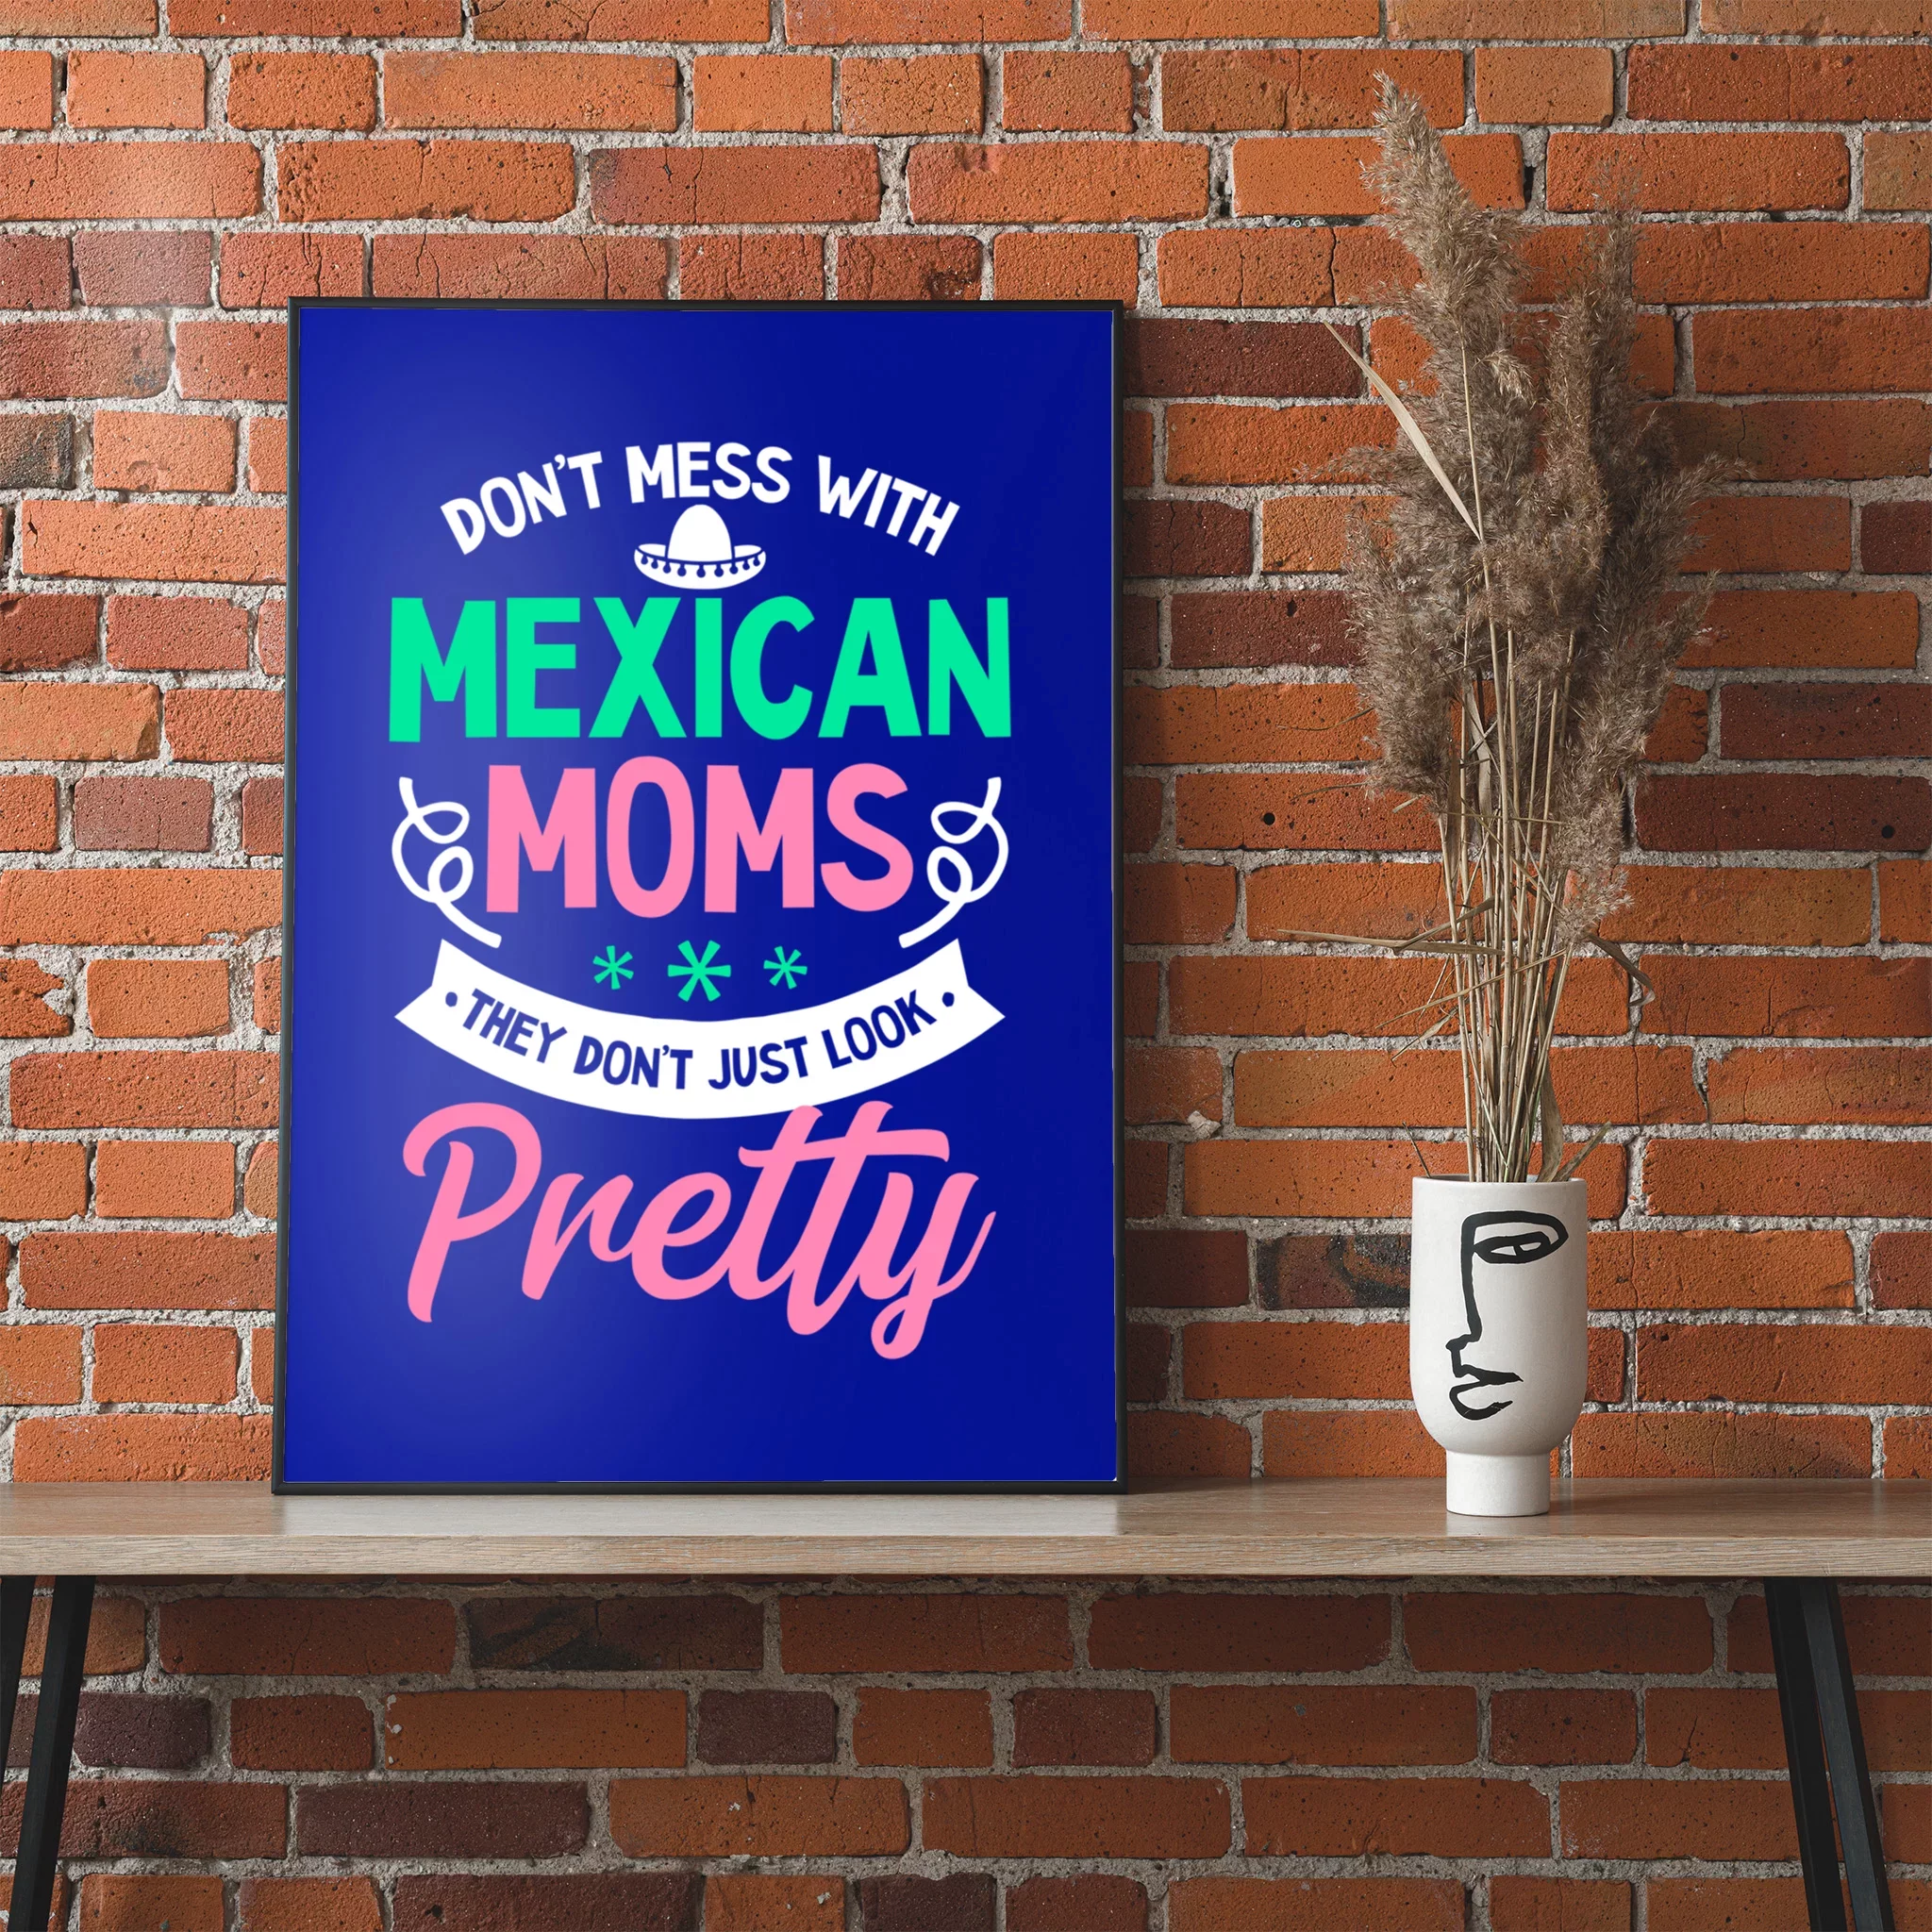  Mexican Mom Gifts